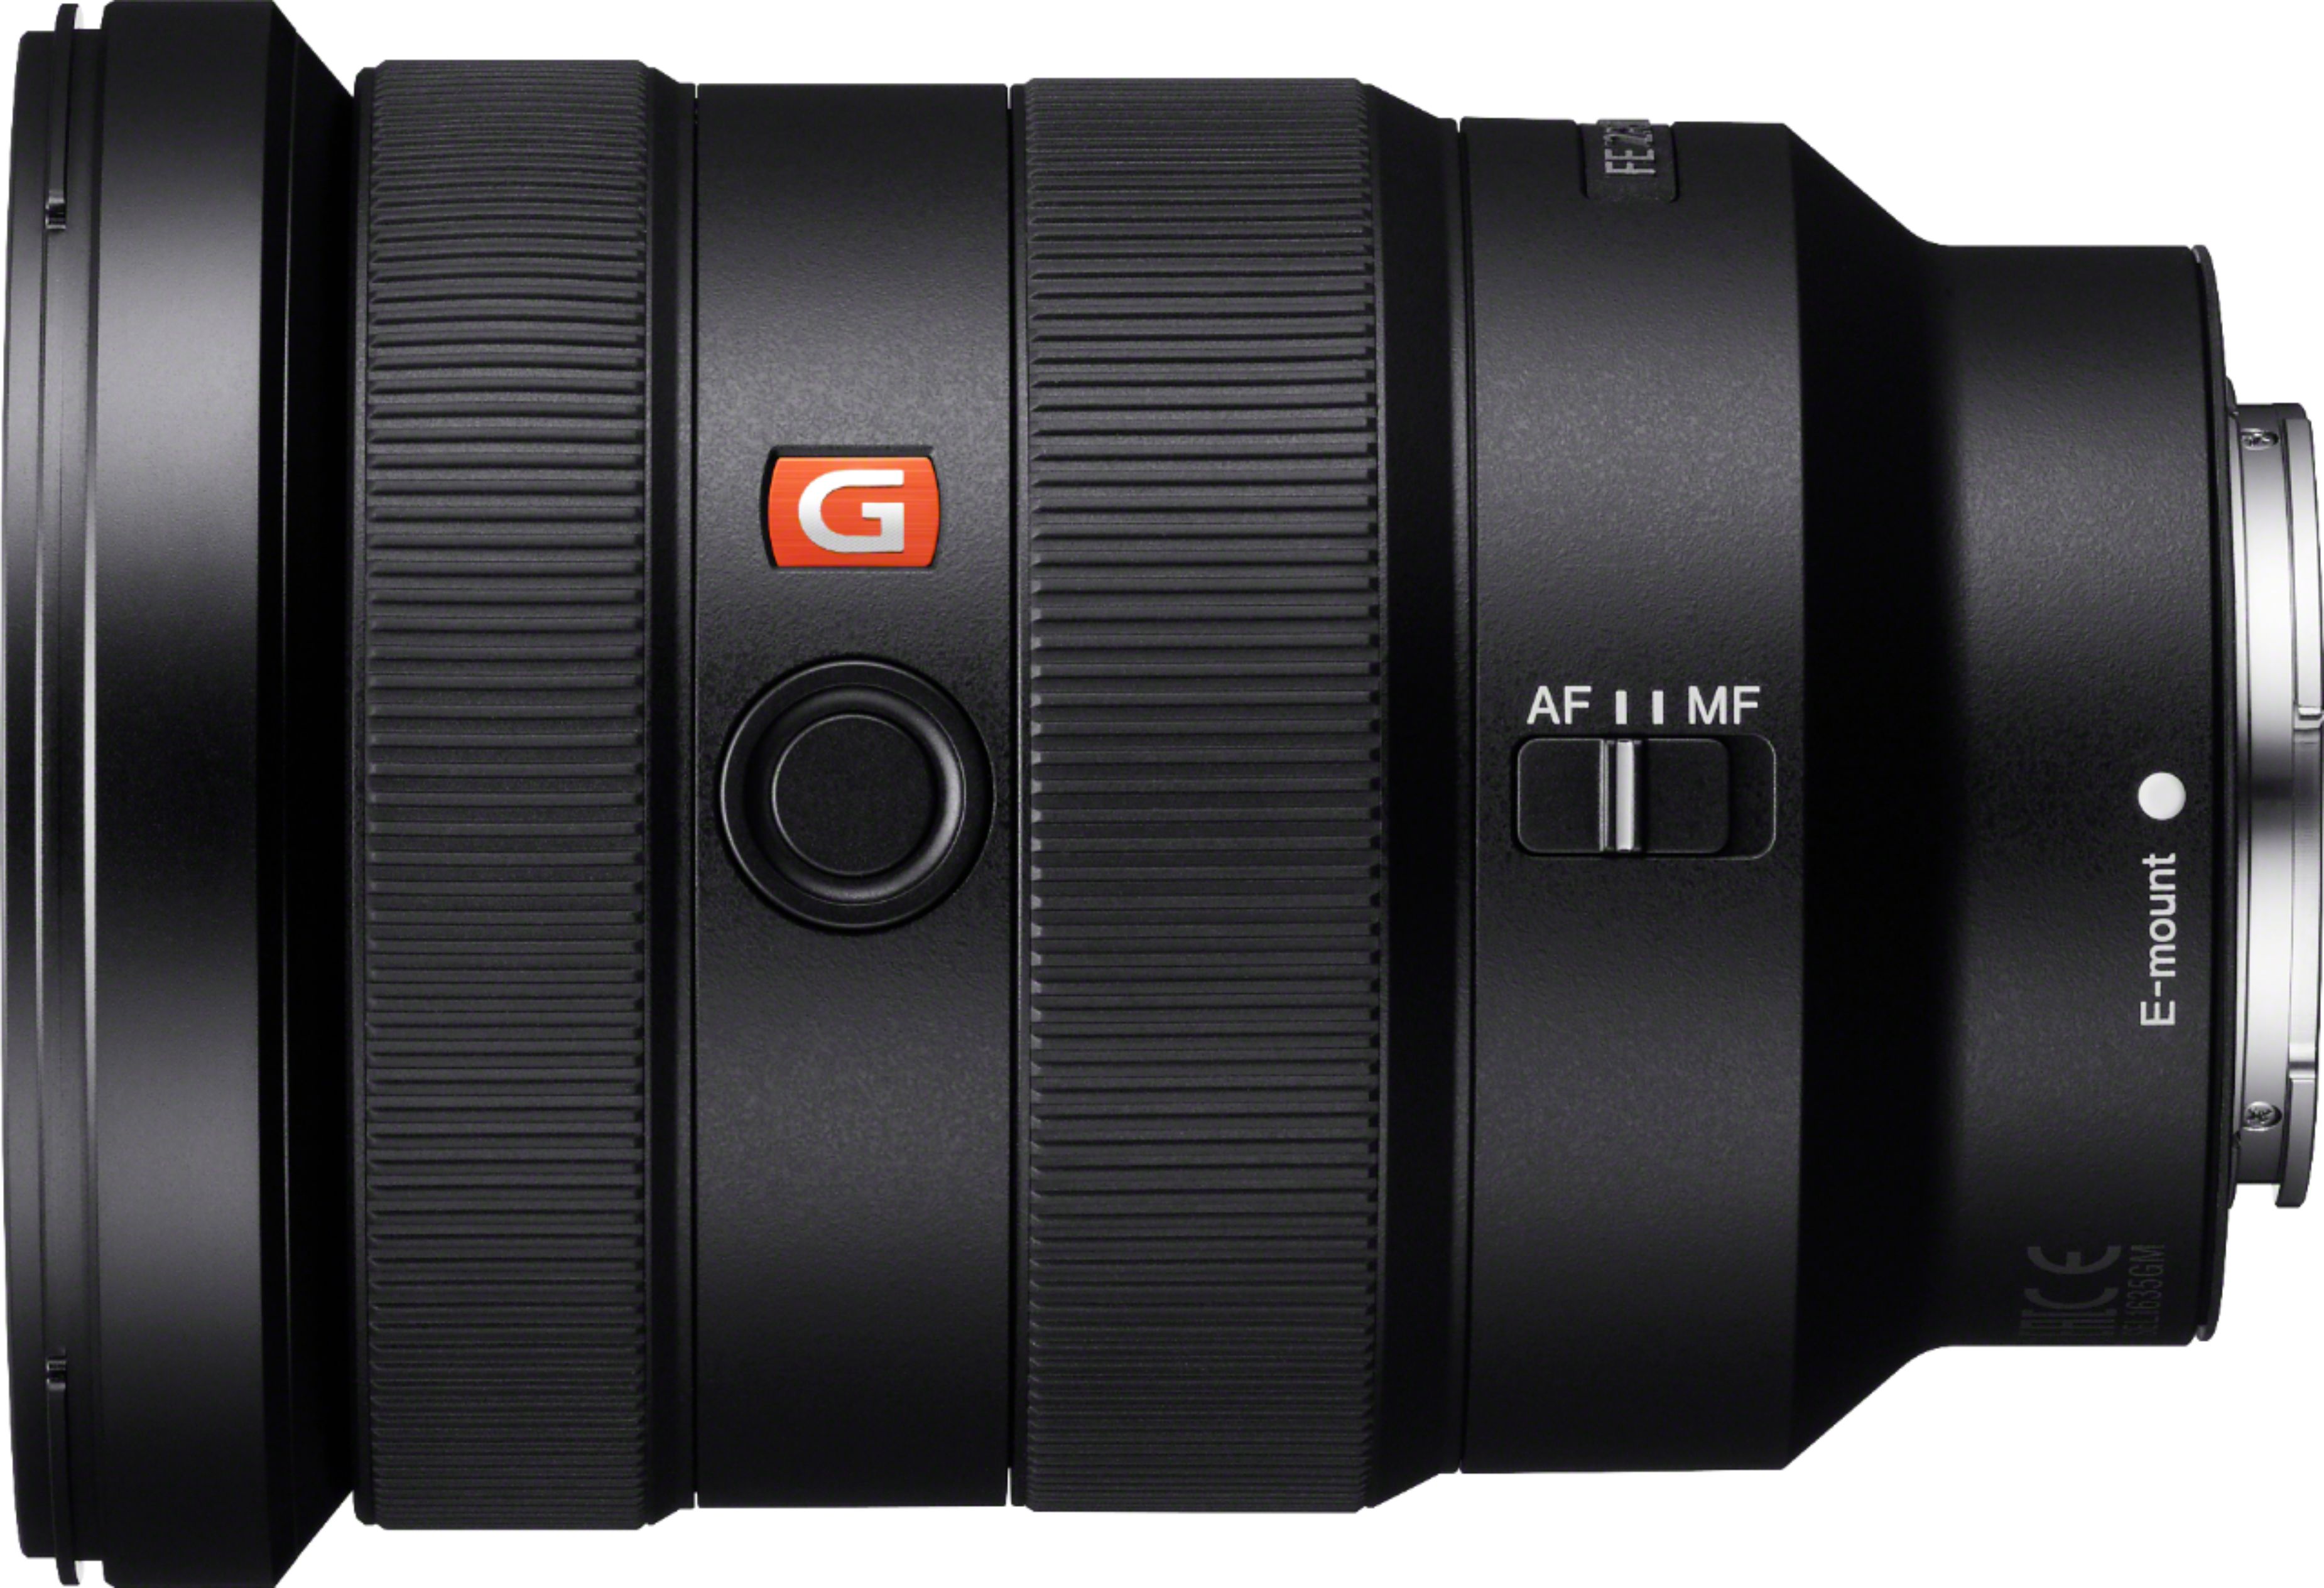 Angle View: Sony - G Master FE 16-35mm f/2.8 GM Wide Angle Zoom Lens for E-mount Cameras - Black